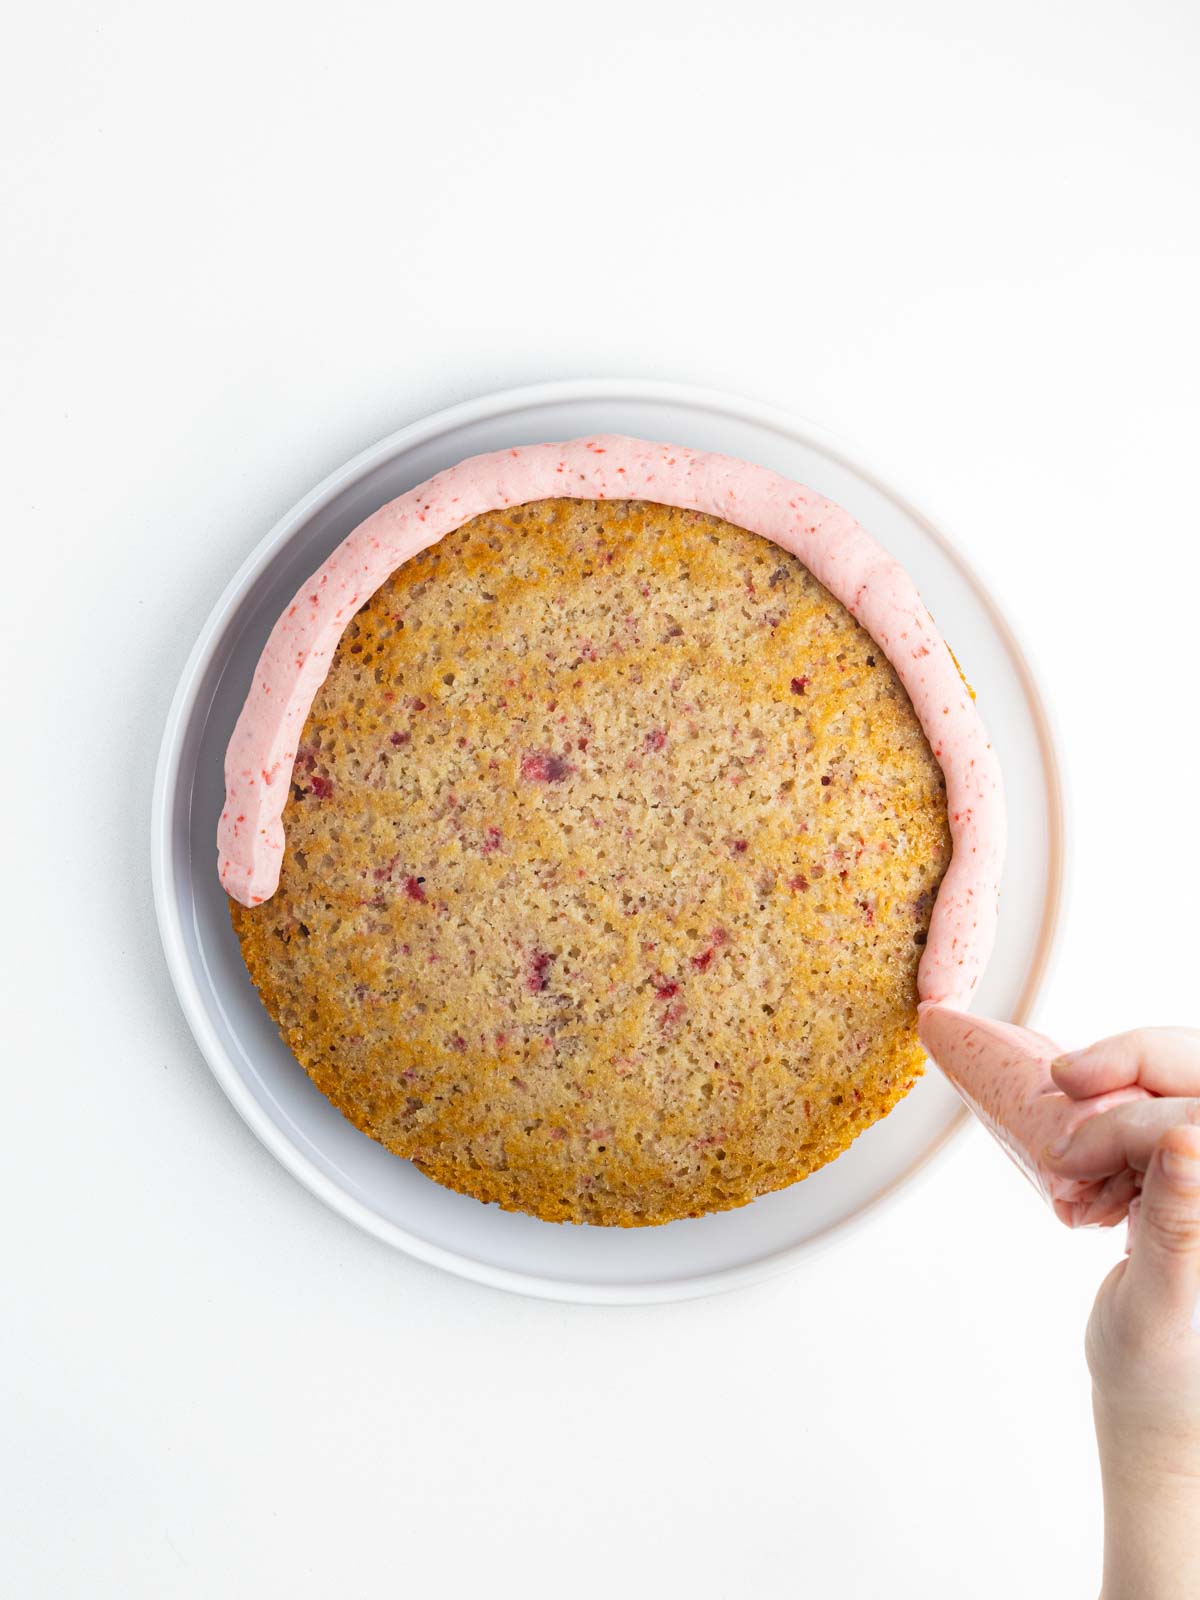 A hand halfway through piping a circle of pink frosting around the outside edge of the cake.